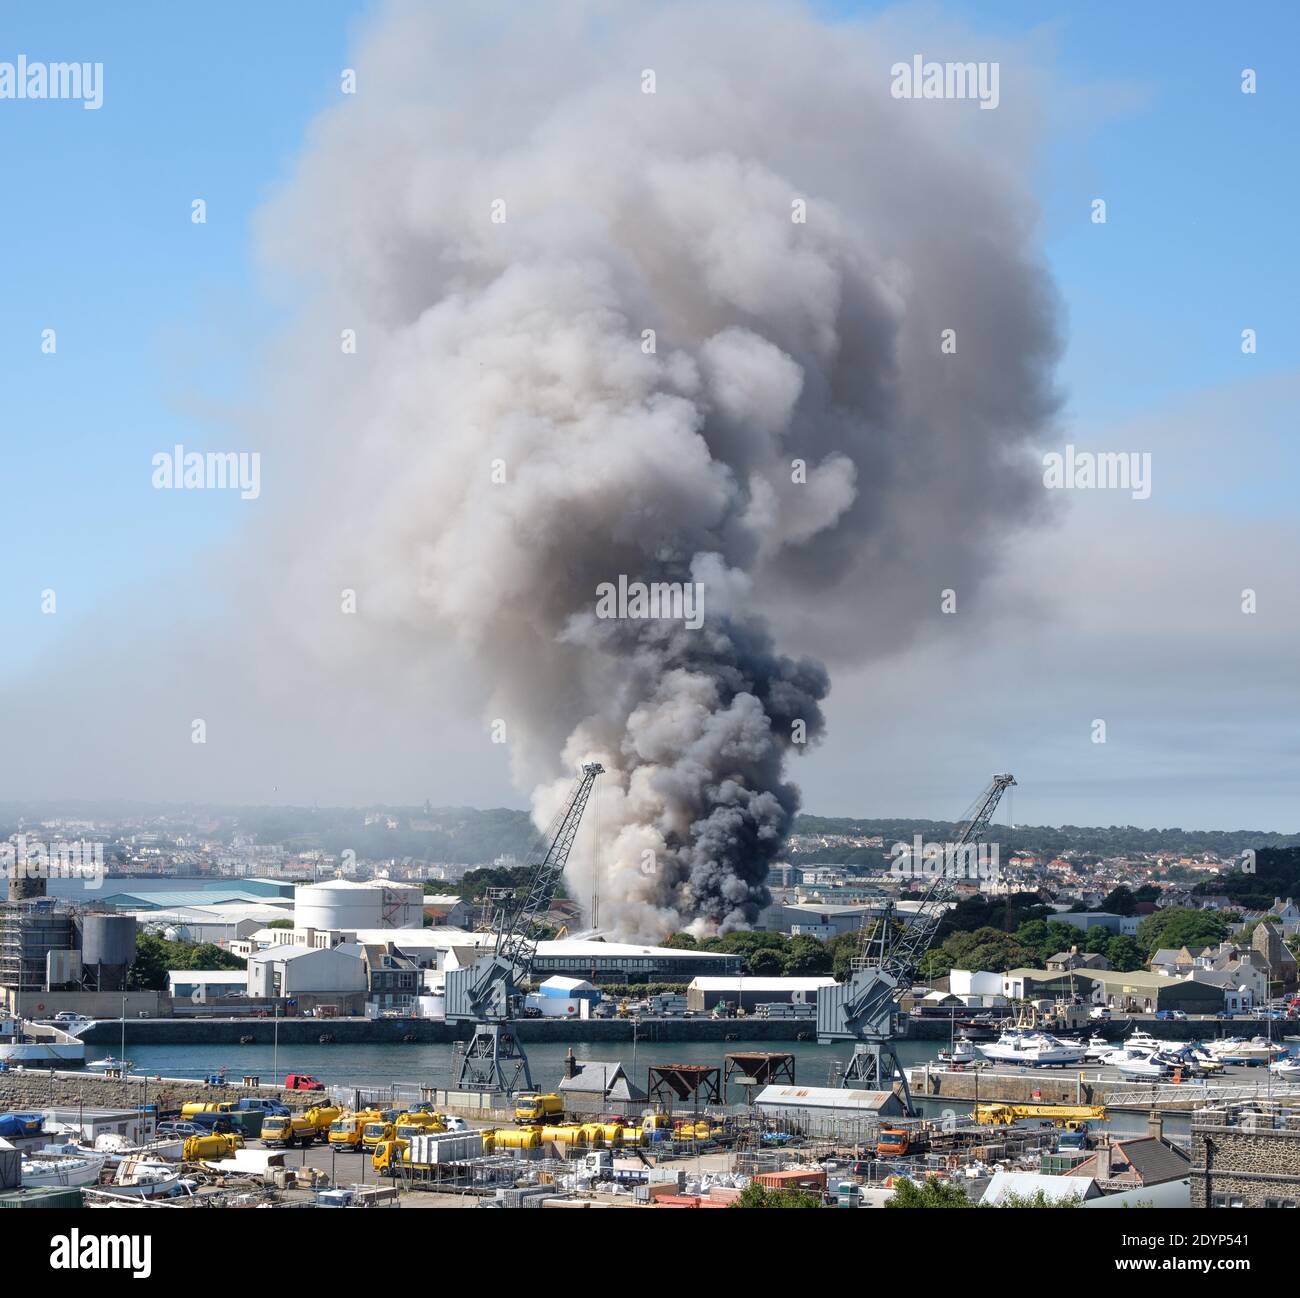 Big industrial fire at recycling yard Stock Photo